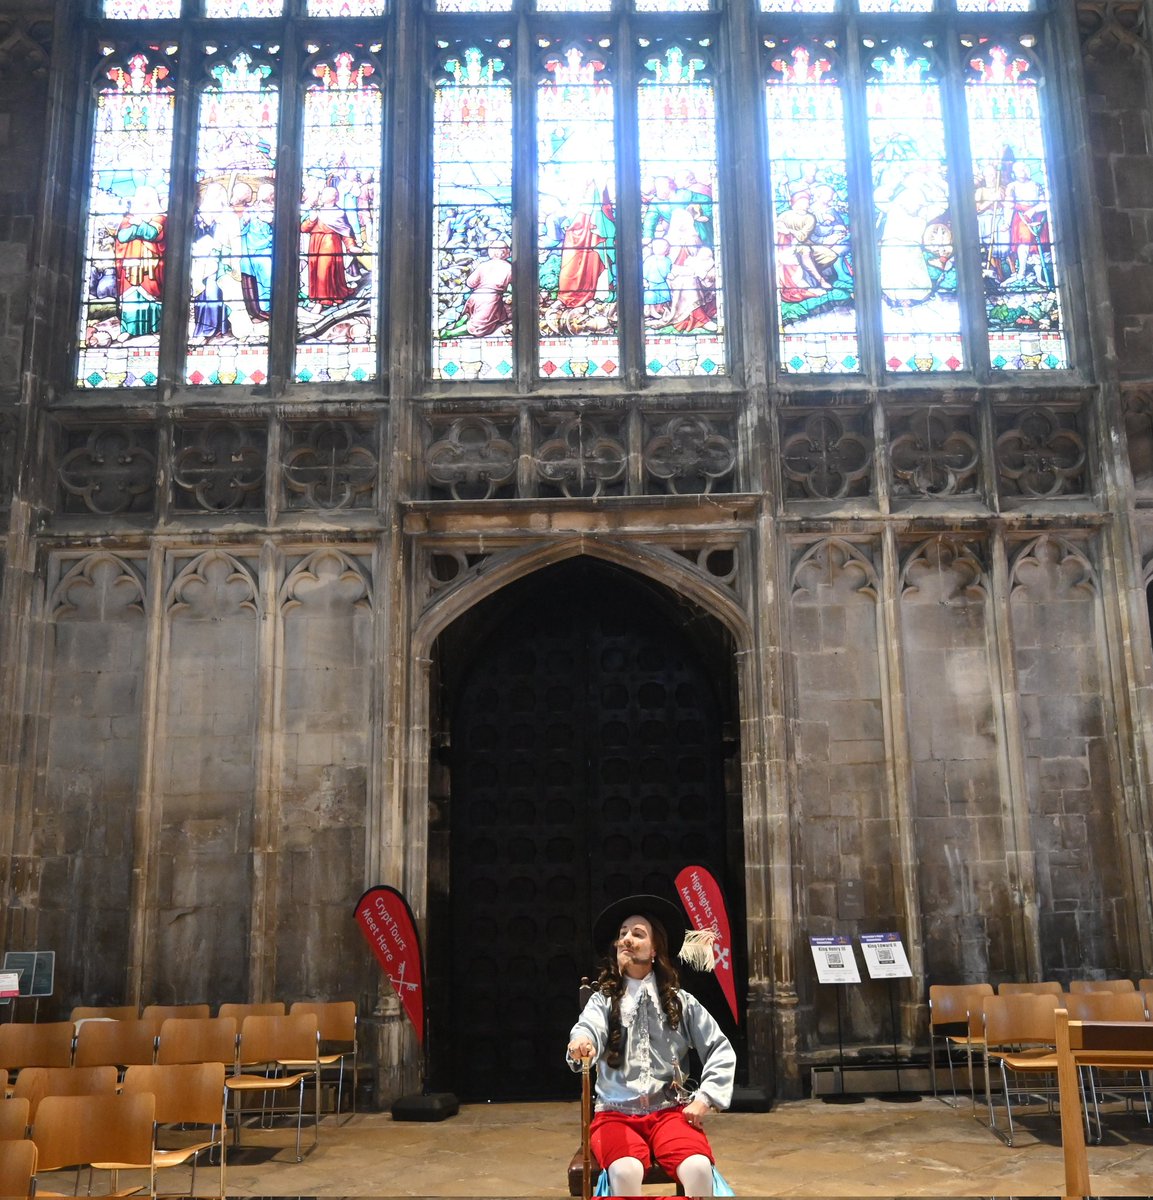 Gloucester cathedral magnificence

#Gloucester #Cathedral #Churches #Church #CharlesI #KingCharles #Gloucestershire #sundayvibes 
#GlosHistFest23 #Stainedglass #Stainedglasssunday #Art